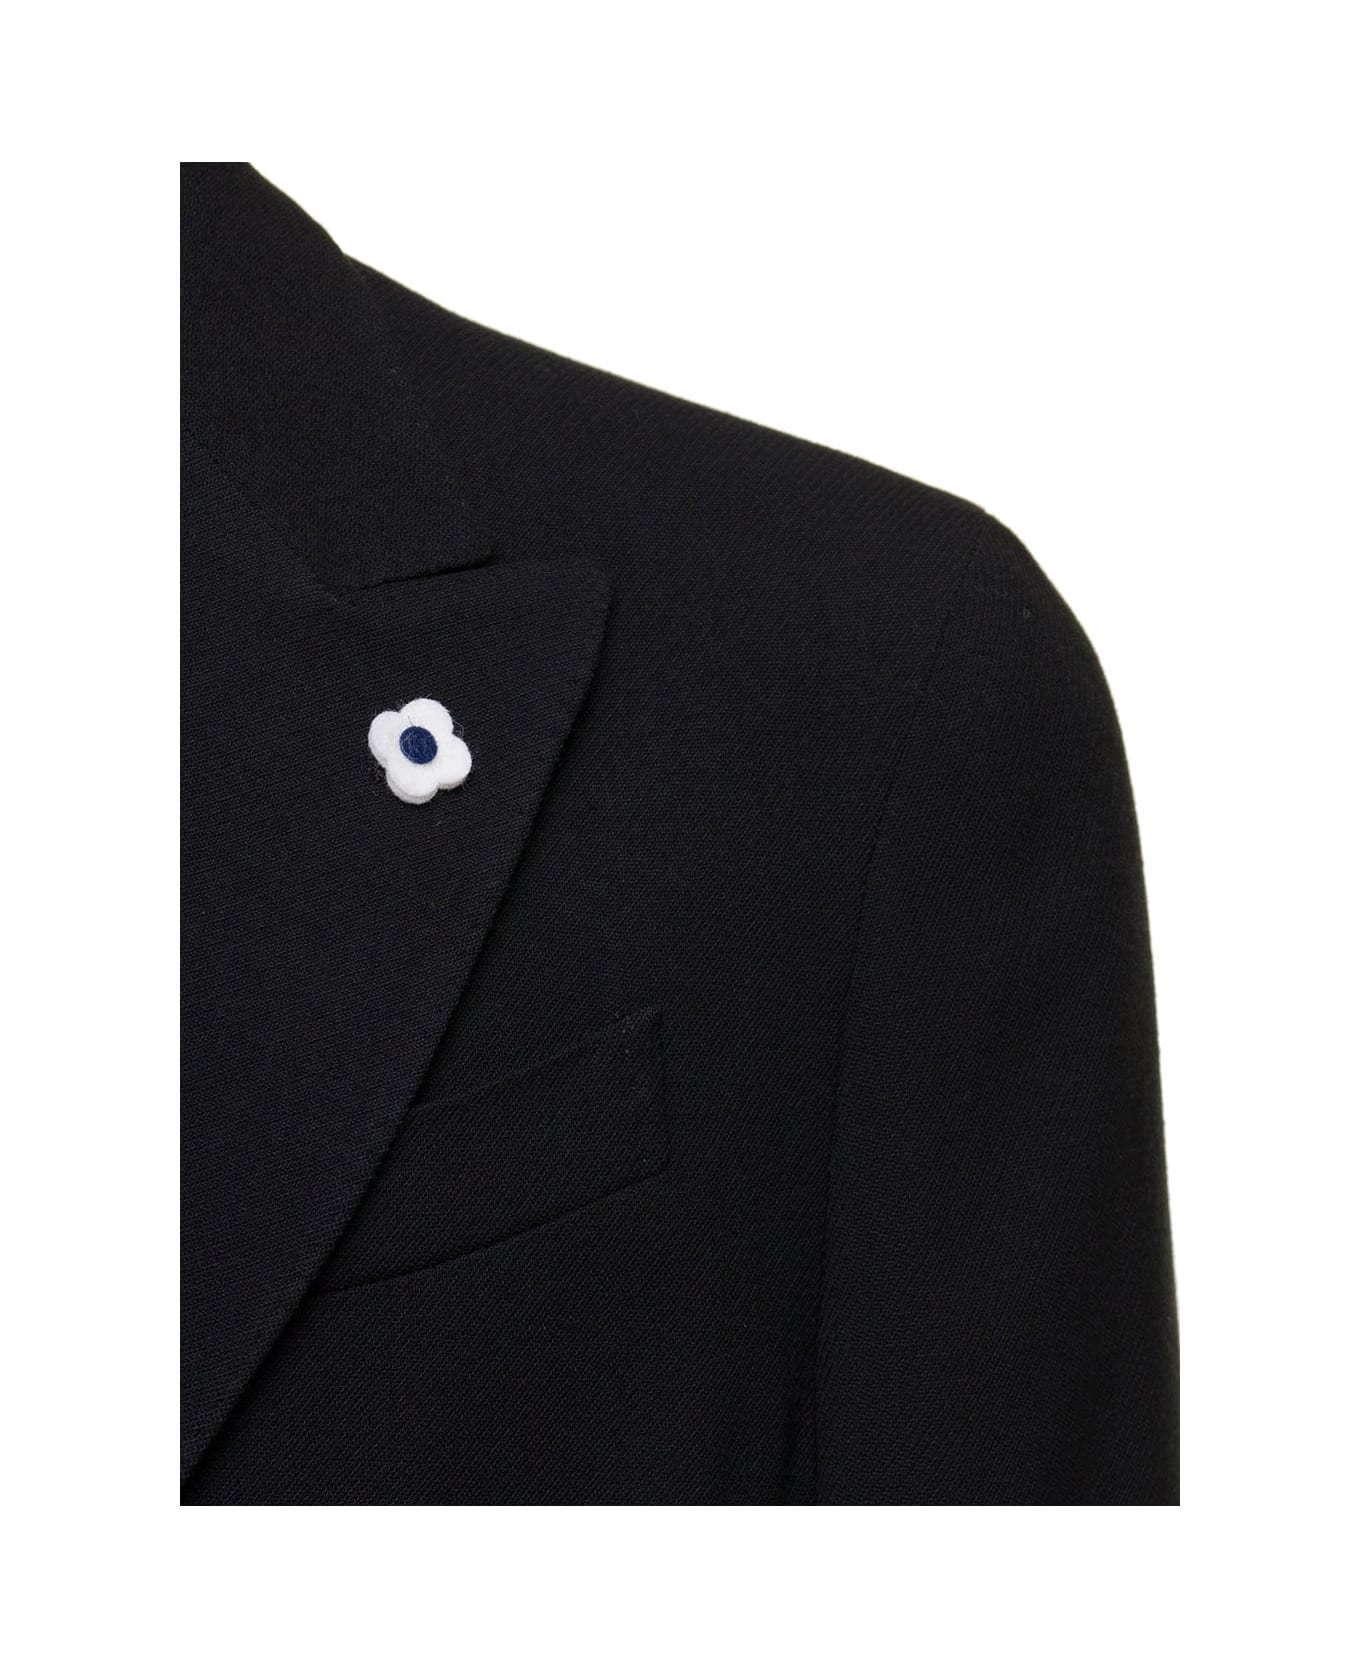 Lardini Black Double-breasted Jacket With Detachable Pin In Cotton And Wool Blend Man - Black